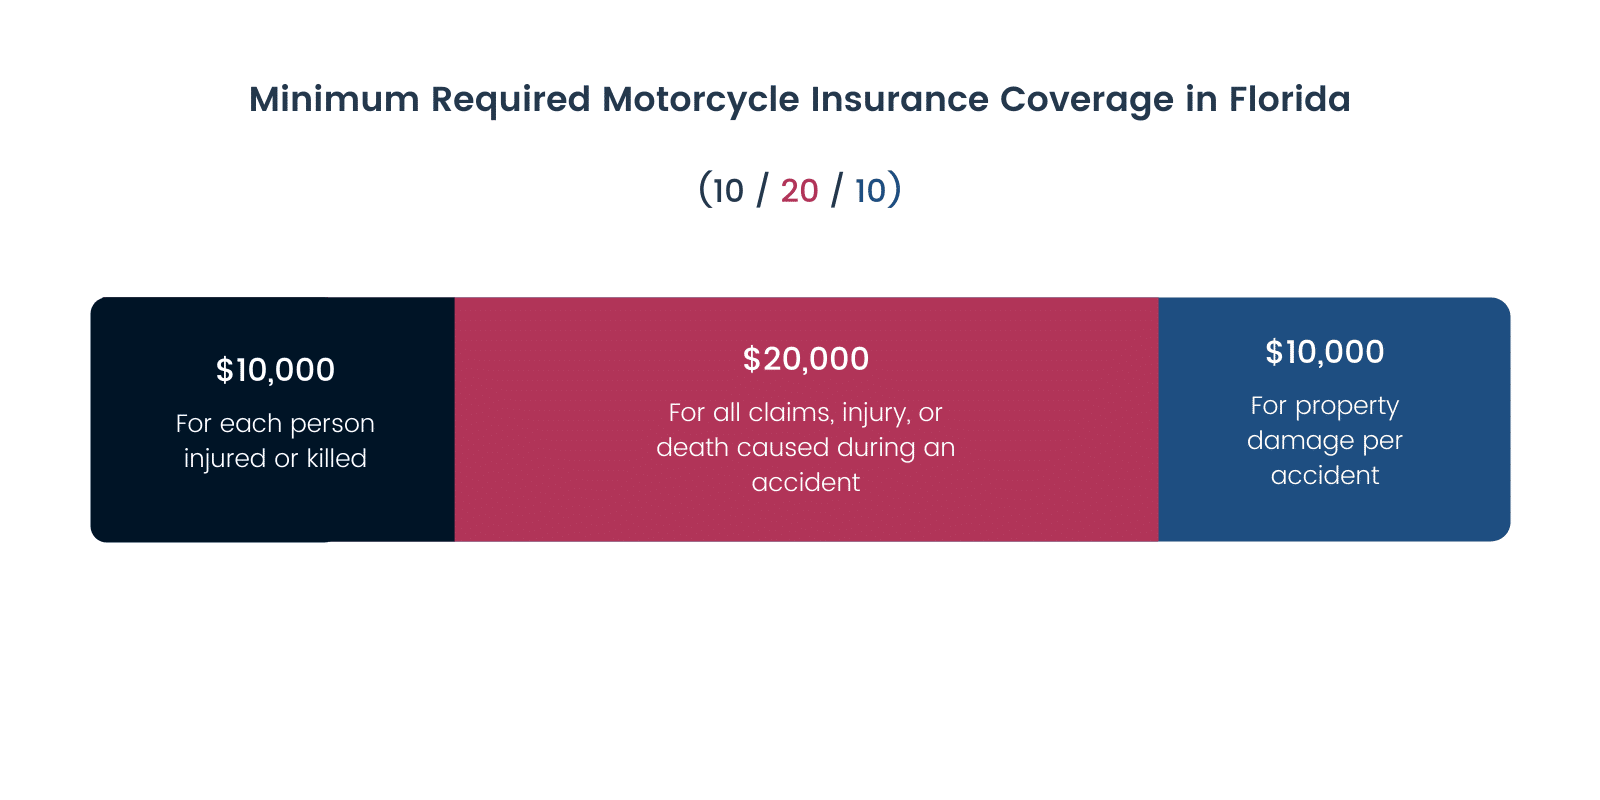 Florida Motorcycle Insurance Everything You Want to Know in 2021